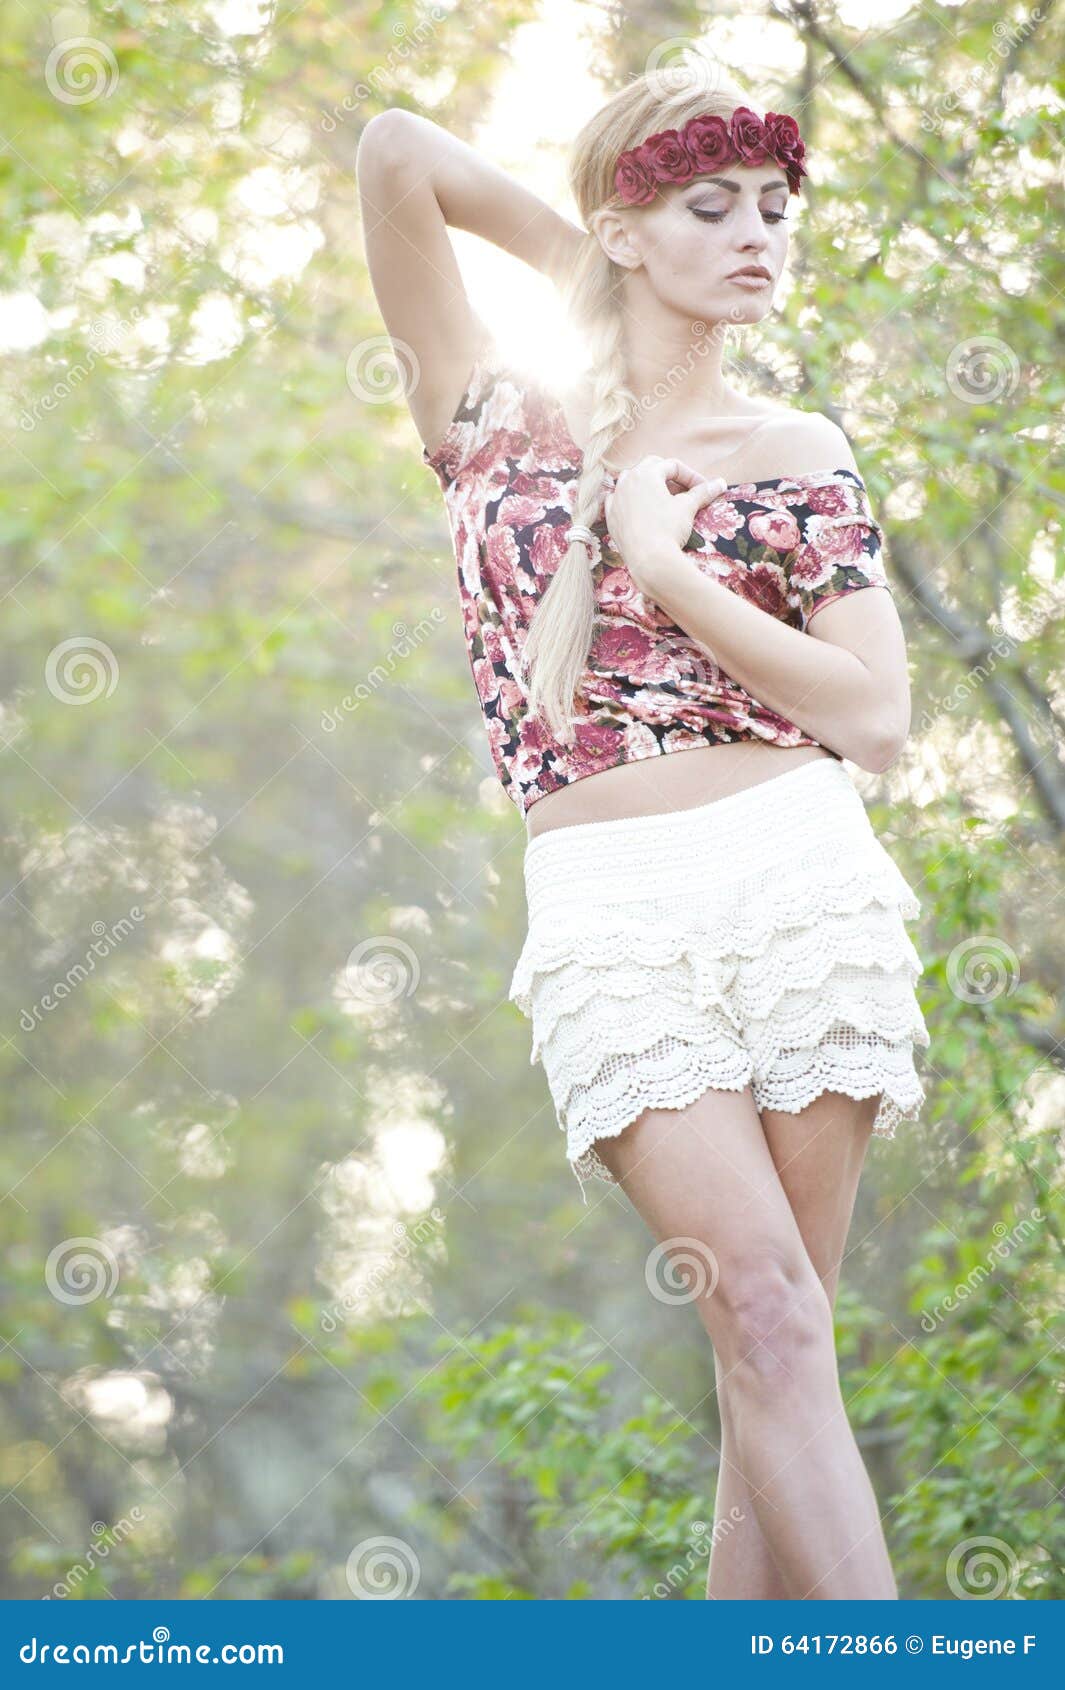 Gorgeous Blonde in Red Flower Crown Stock Photo - Image of human, braid ...